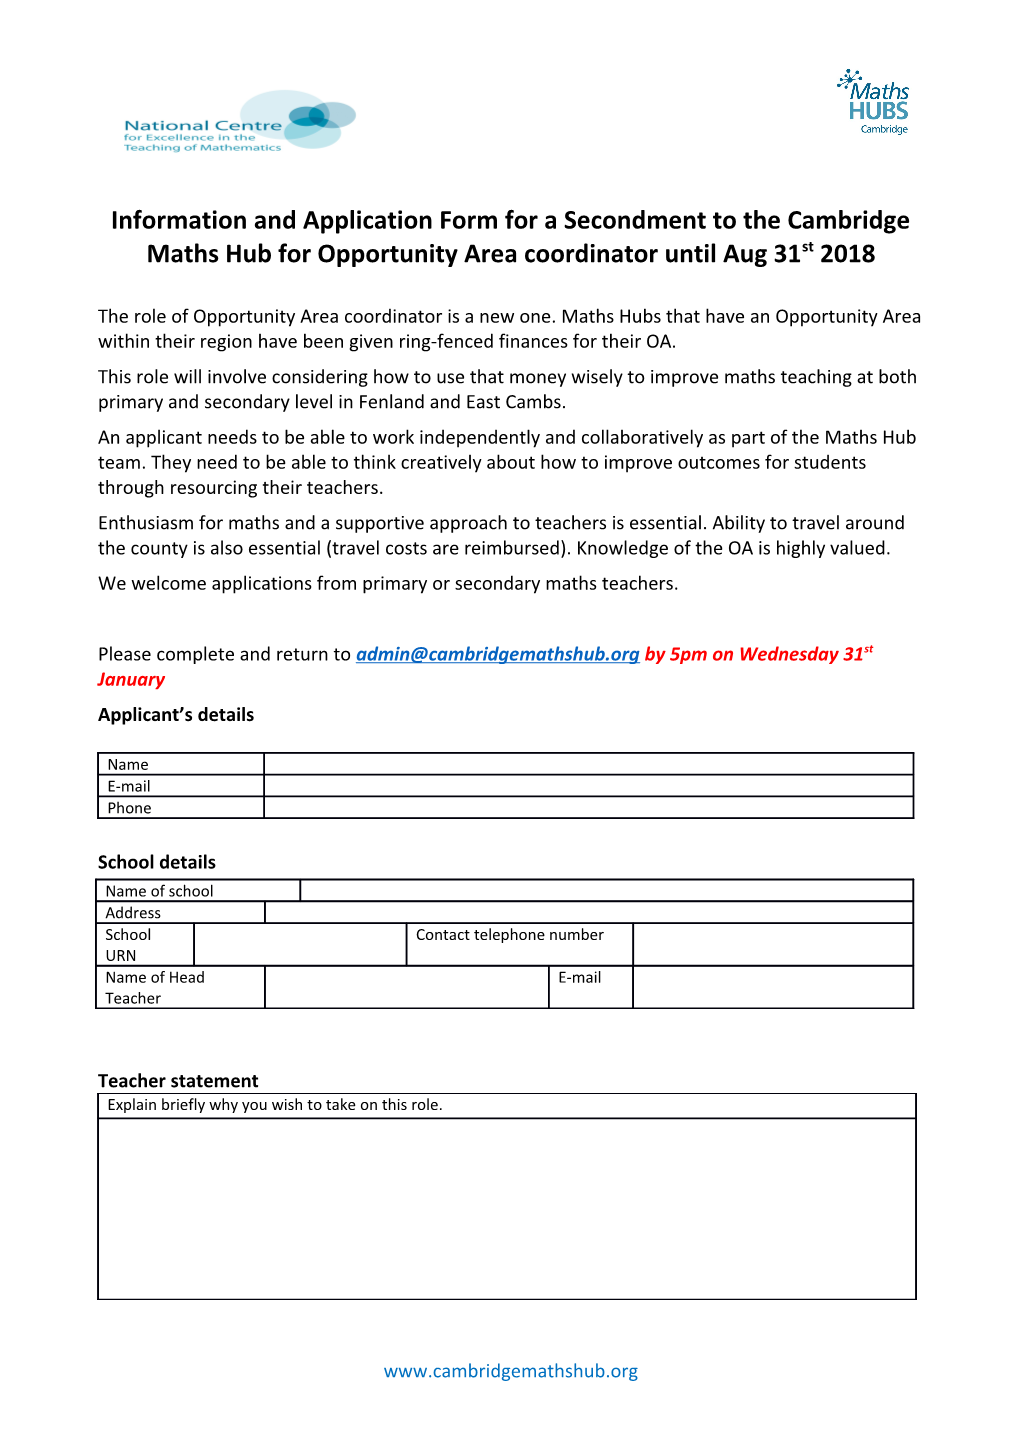 Information and Application Form for a Secondment to the Cambridge Maths Hubfor Opportunity